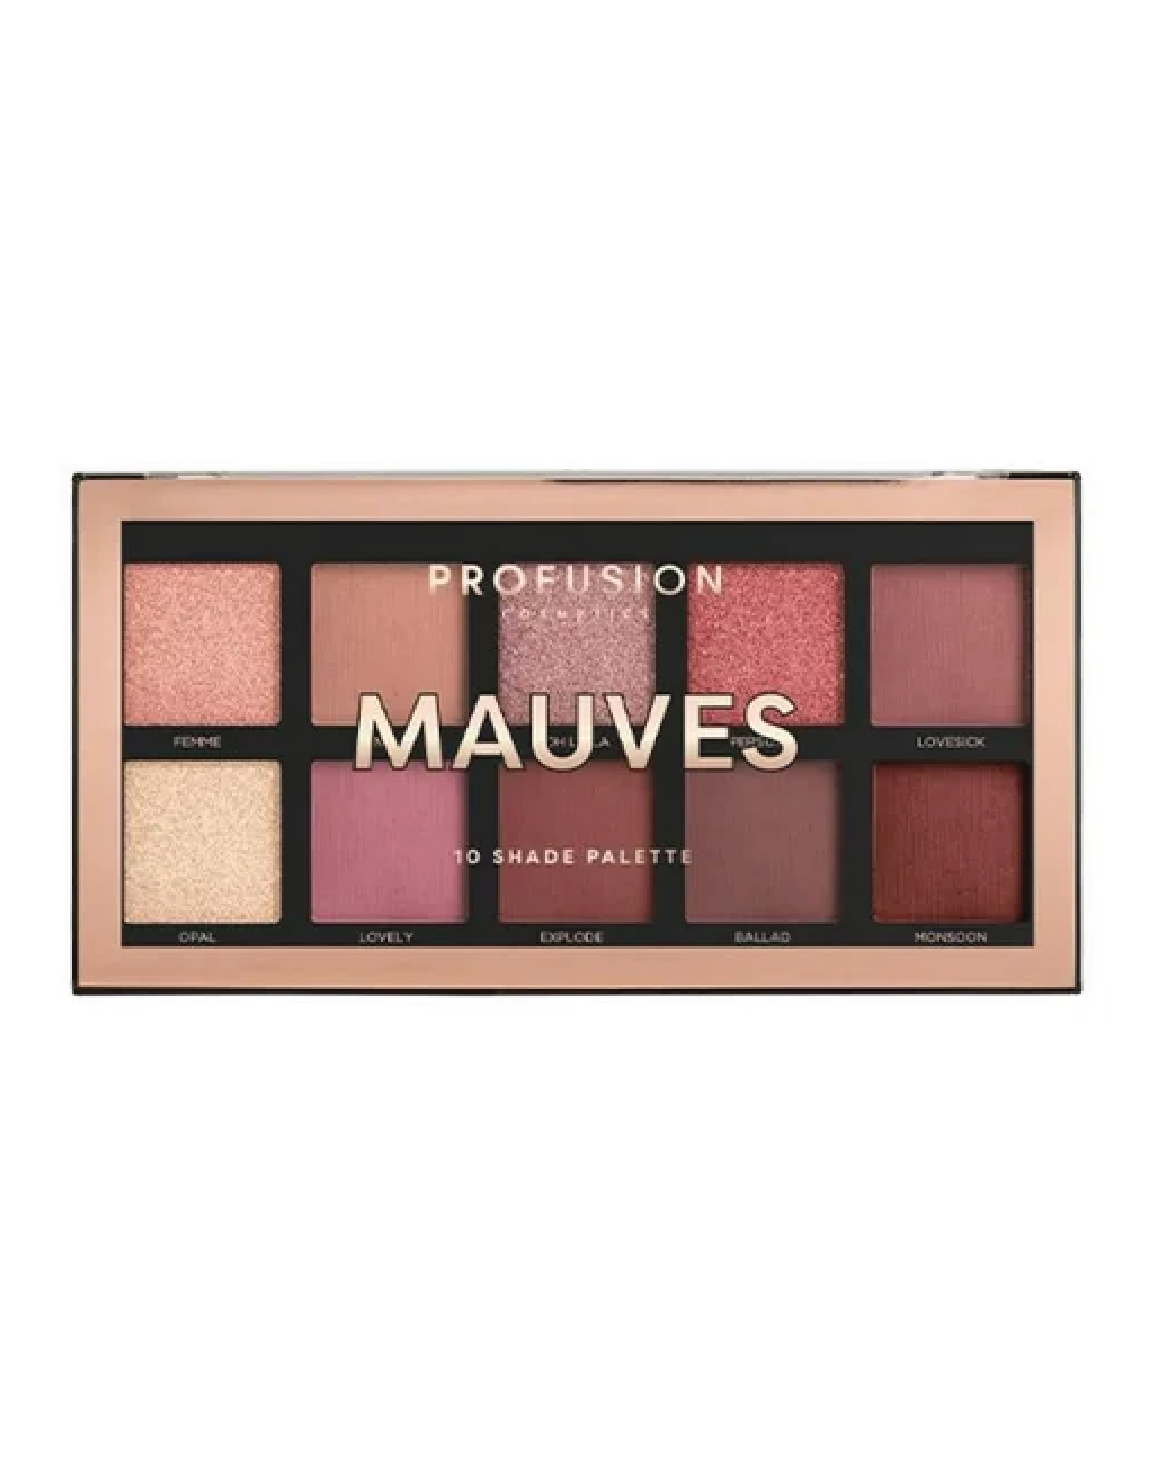 10 palette eyeshadow with various mauves